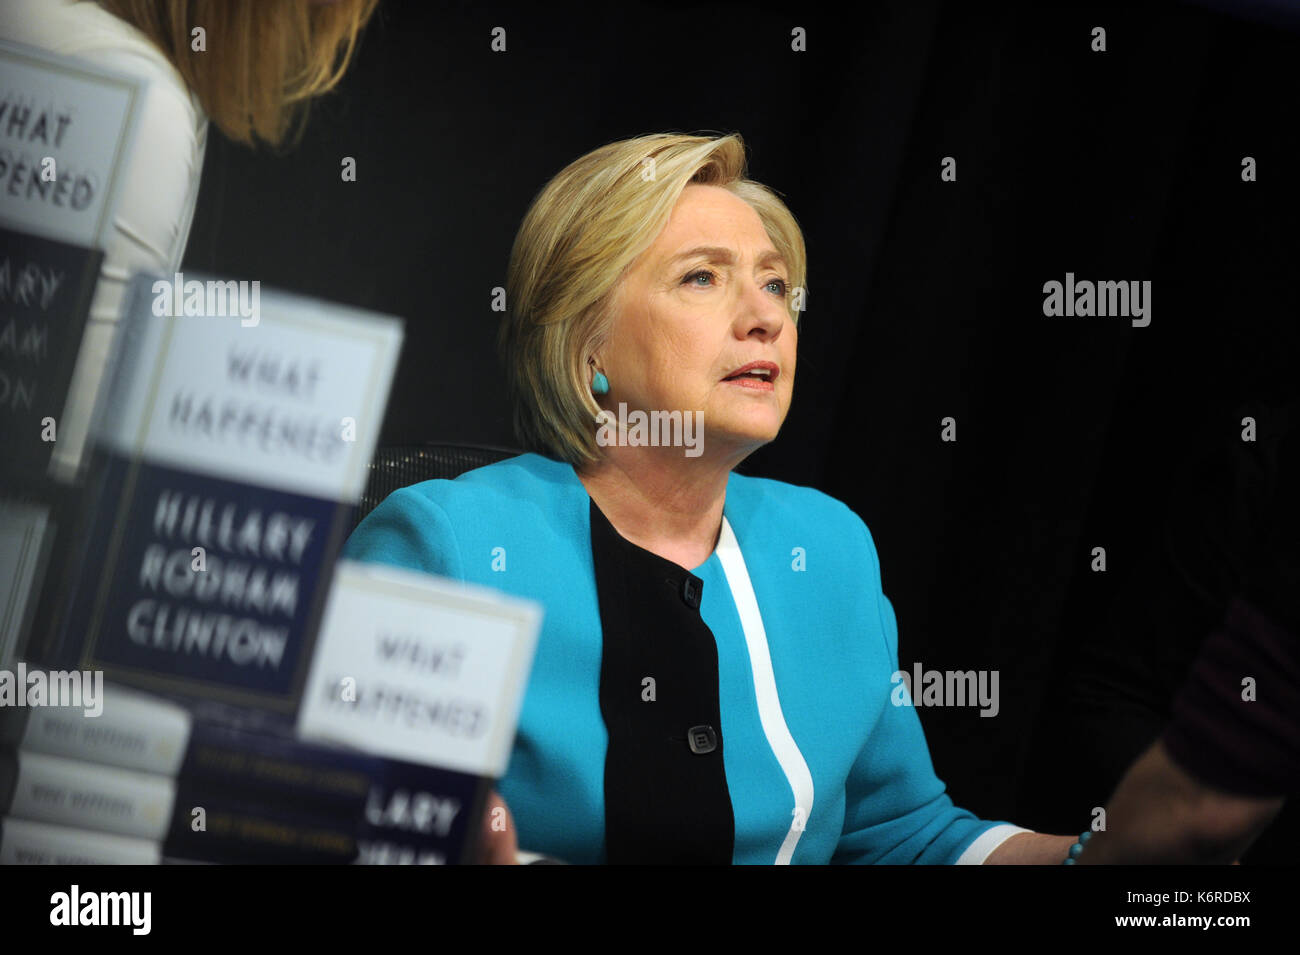 New York, NY, USA. 12th Sep, 2017. Former US Secretary of State, Hillary Clinton signs copies of her book, 'What Happened' at Barnes & Noble Union Square on September 12, 2017 in New York City. Credit: Mpi122/Media Punch/Alamy Live News Stock Photo